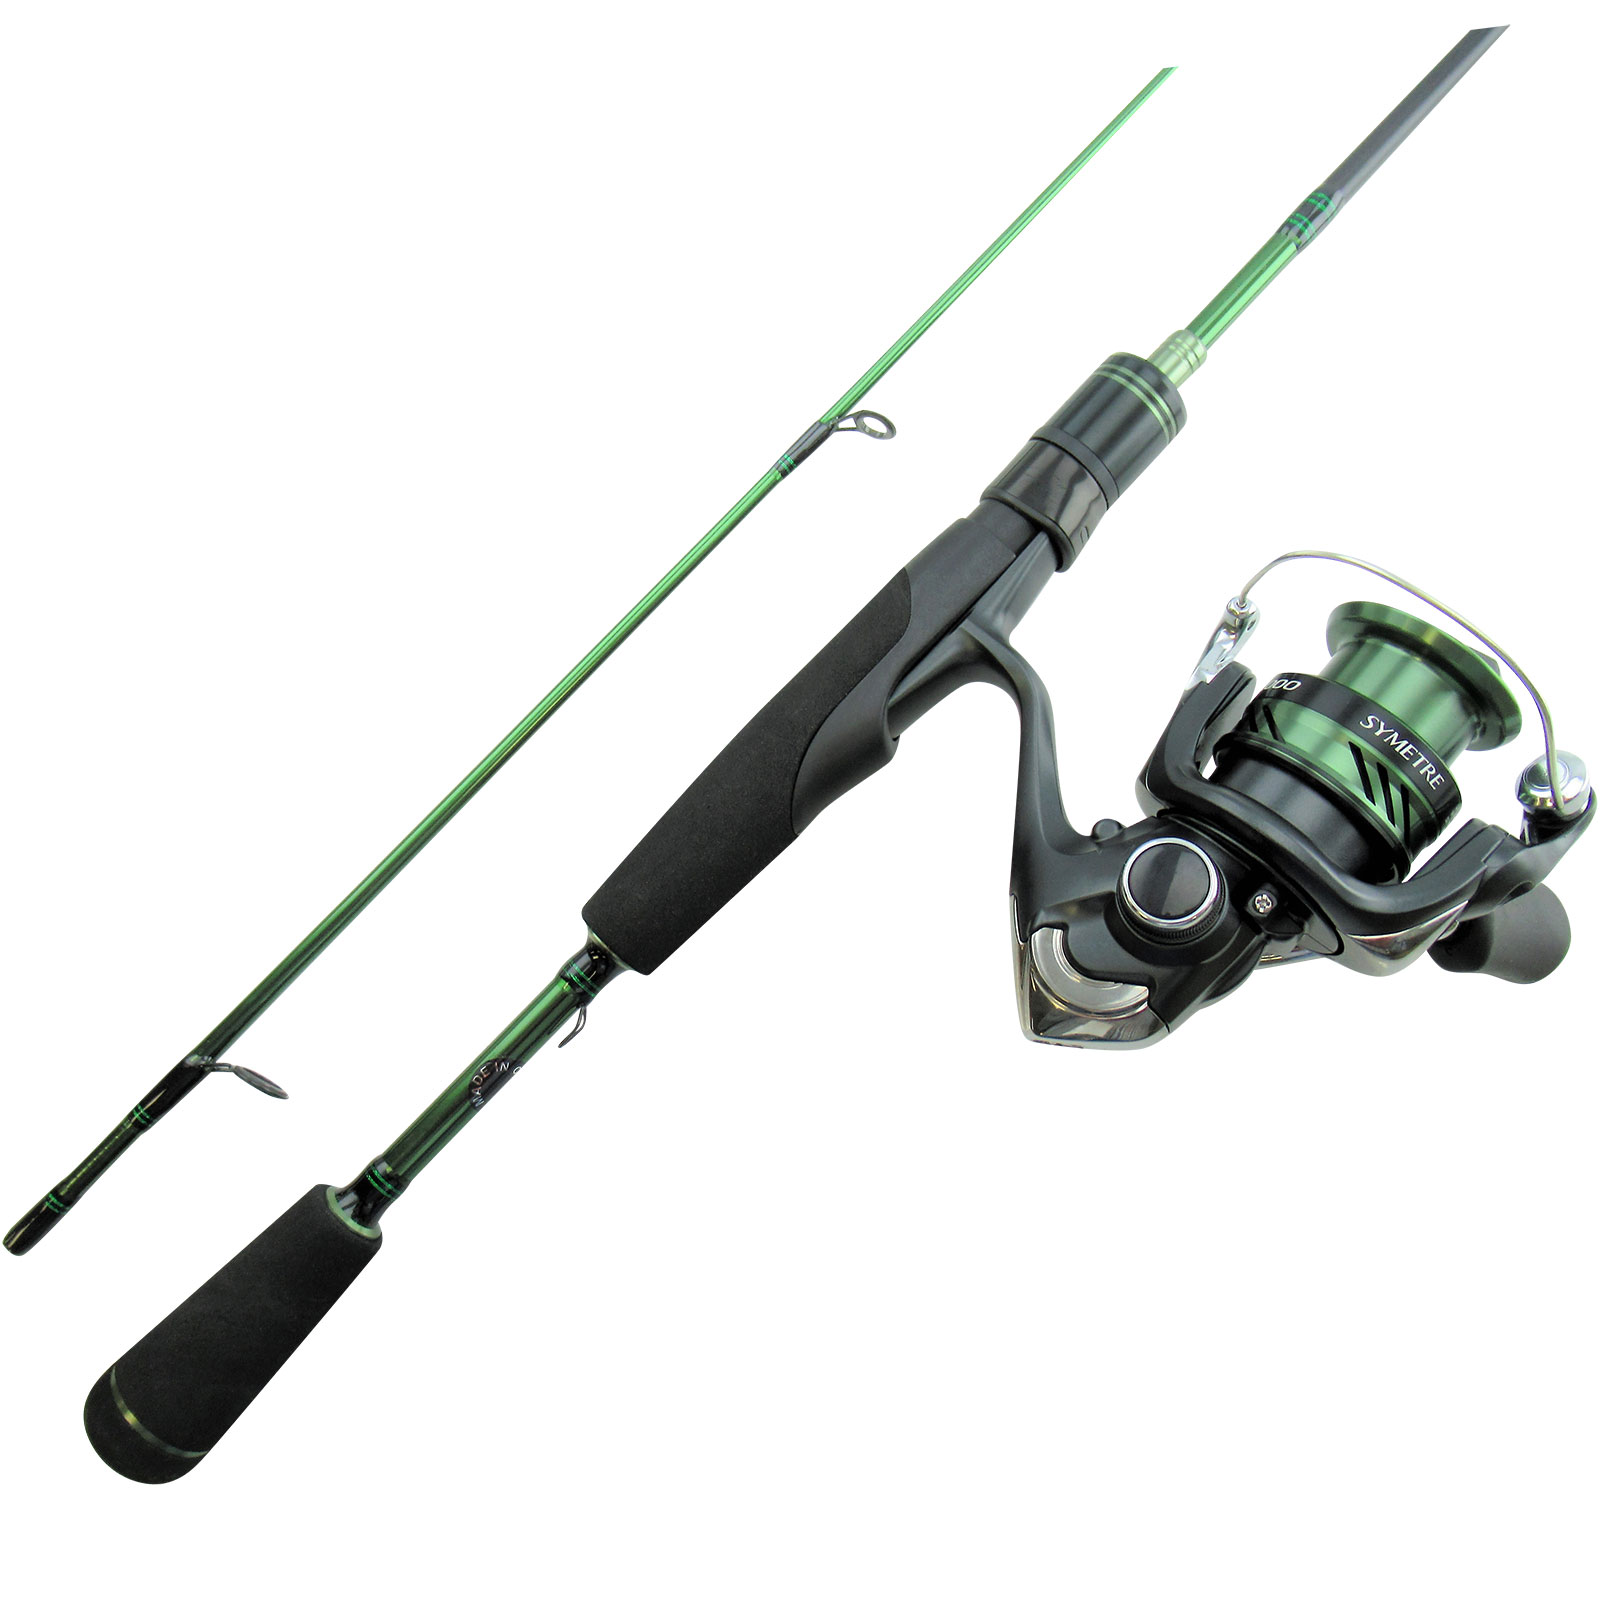 Swimbait reel - Fishing Rods, Reels, Line, and Knots - Bass Fishing Forums